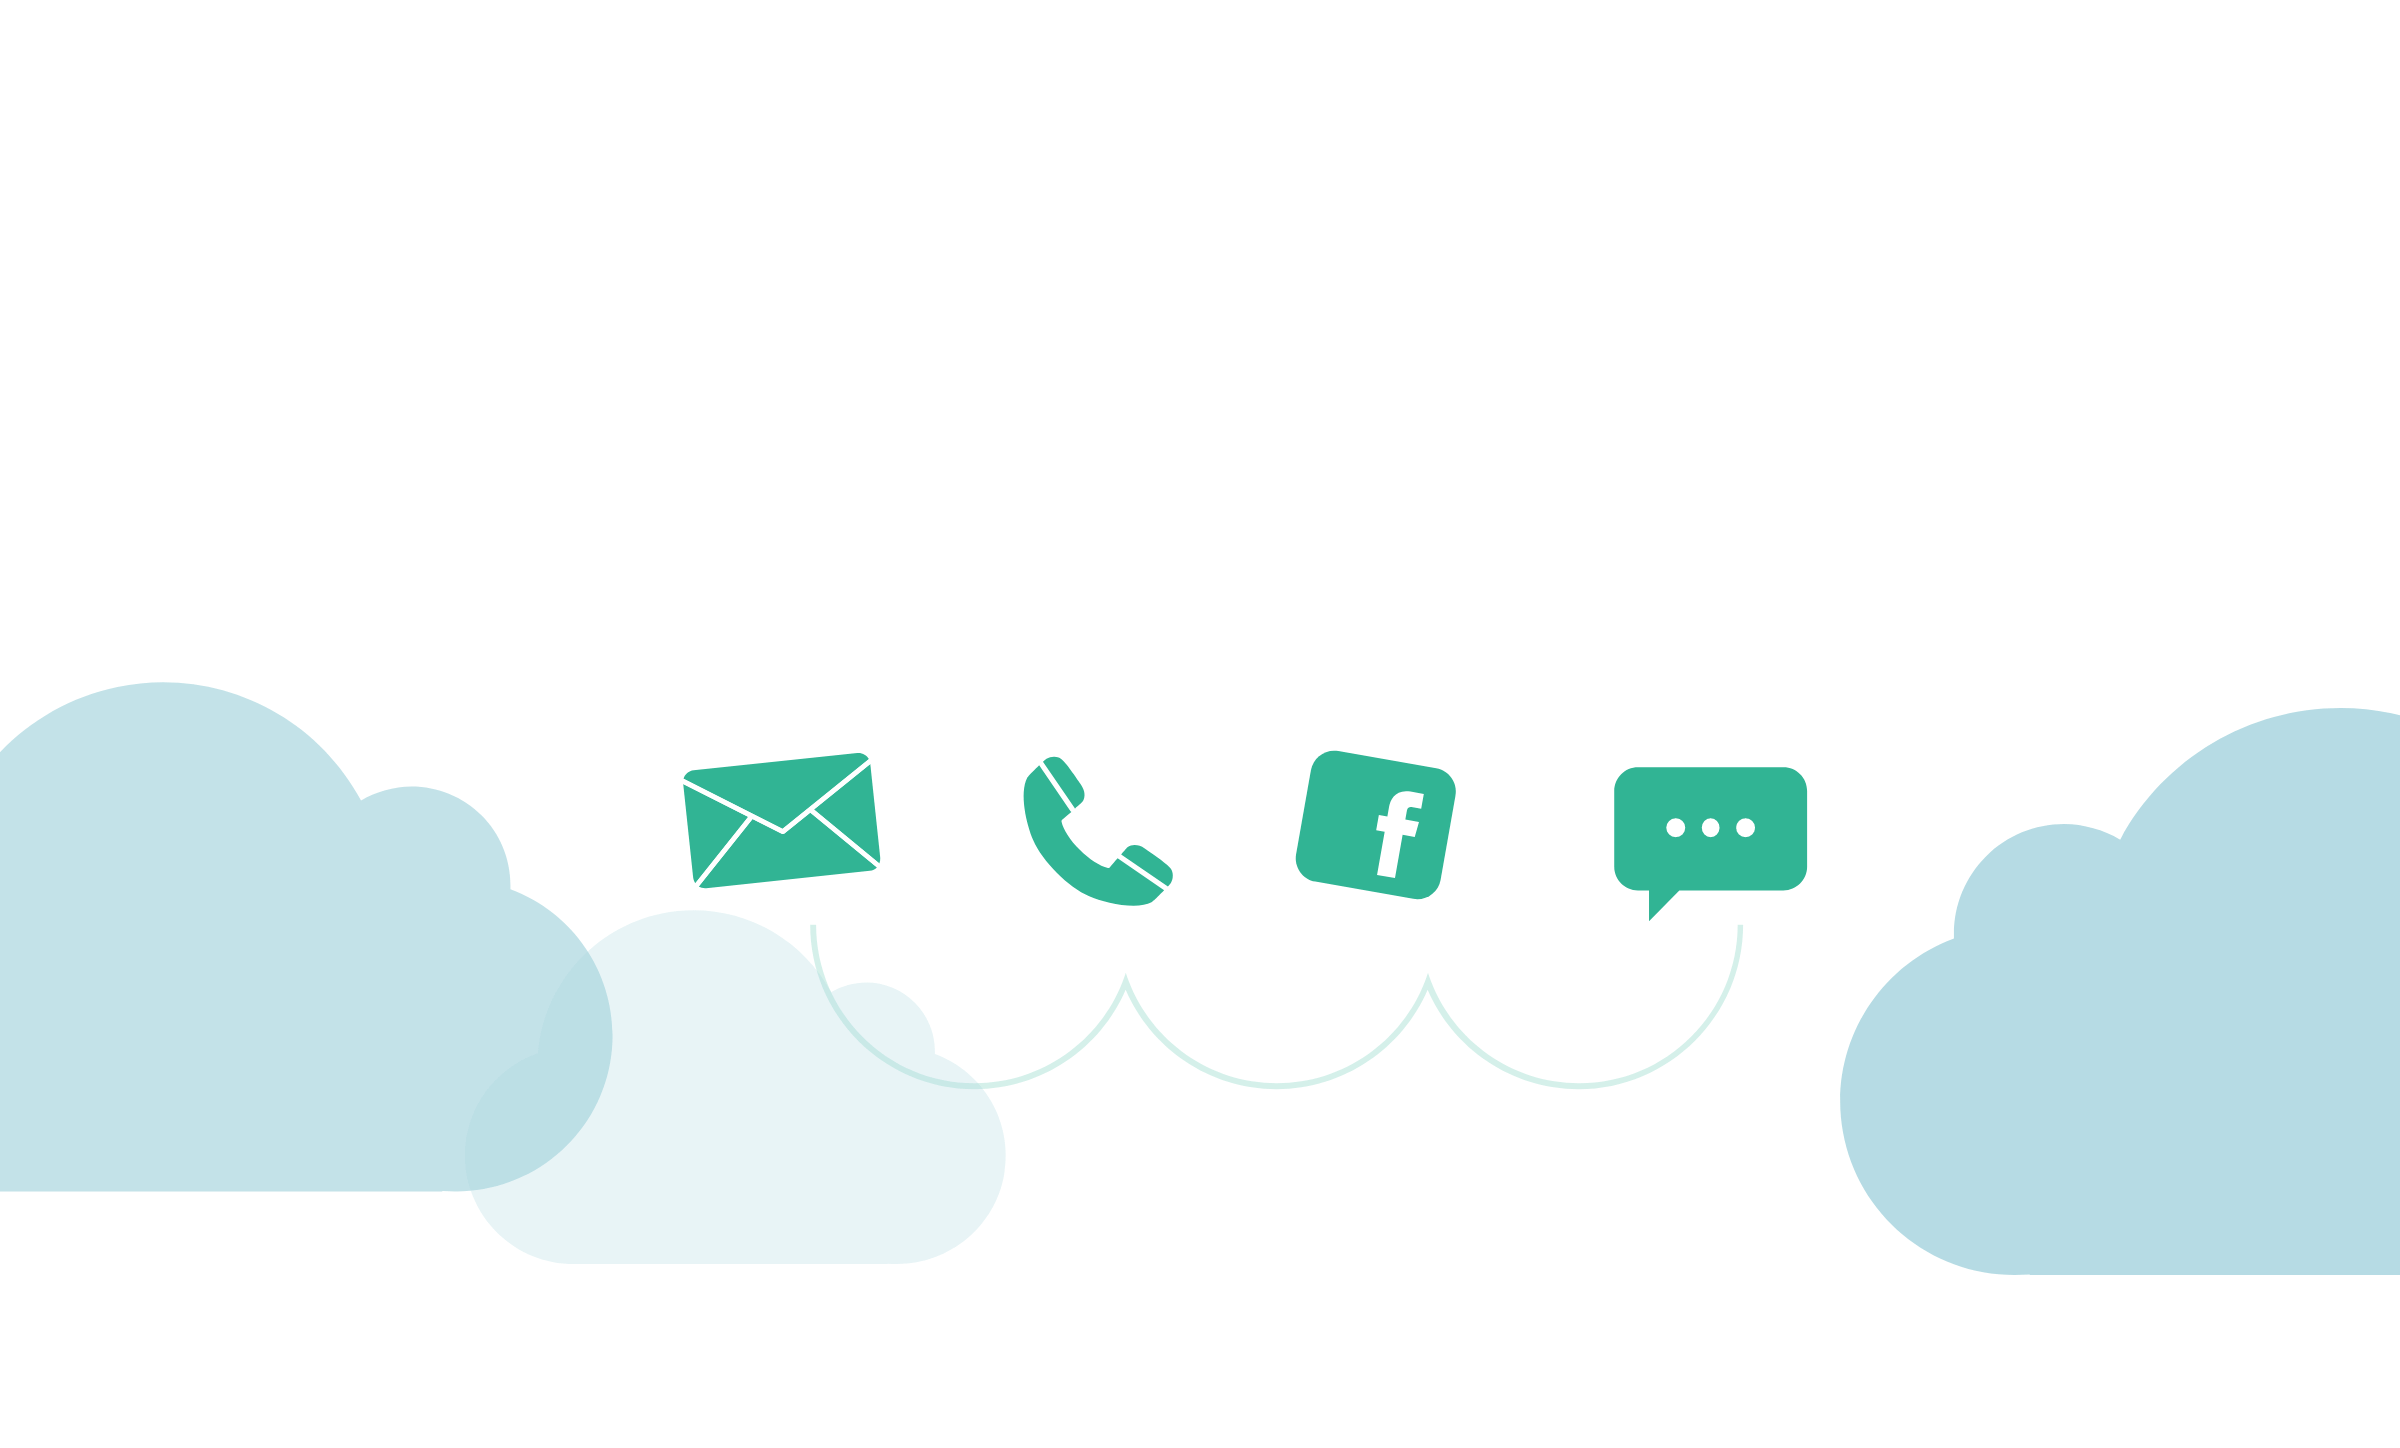 Illustration of clouds with icons of top